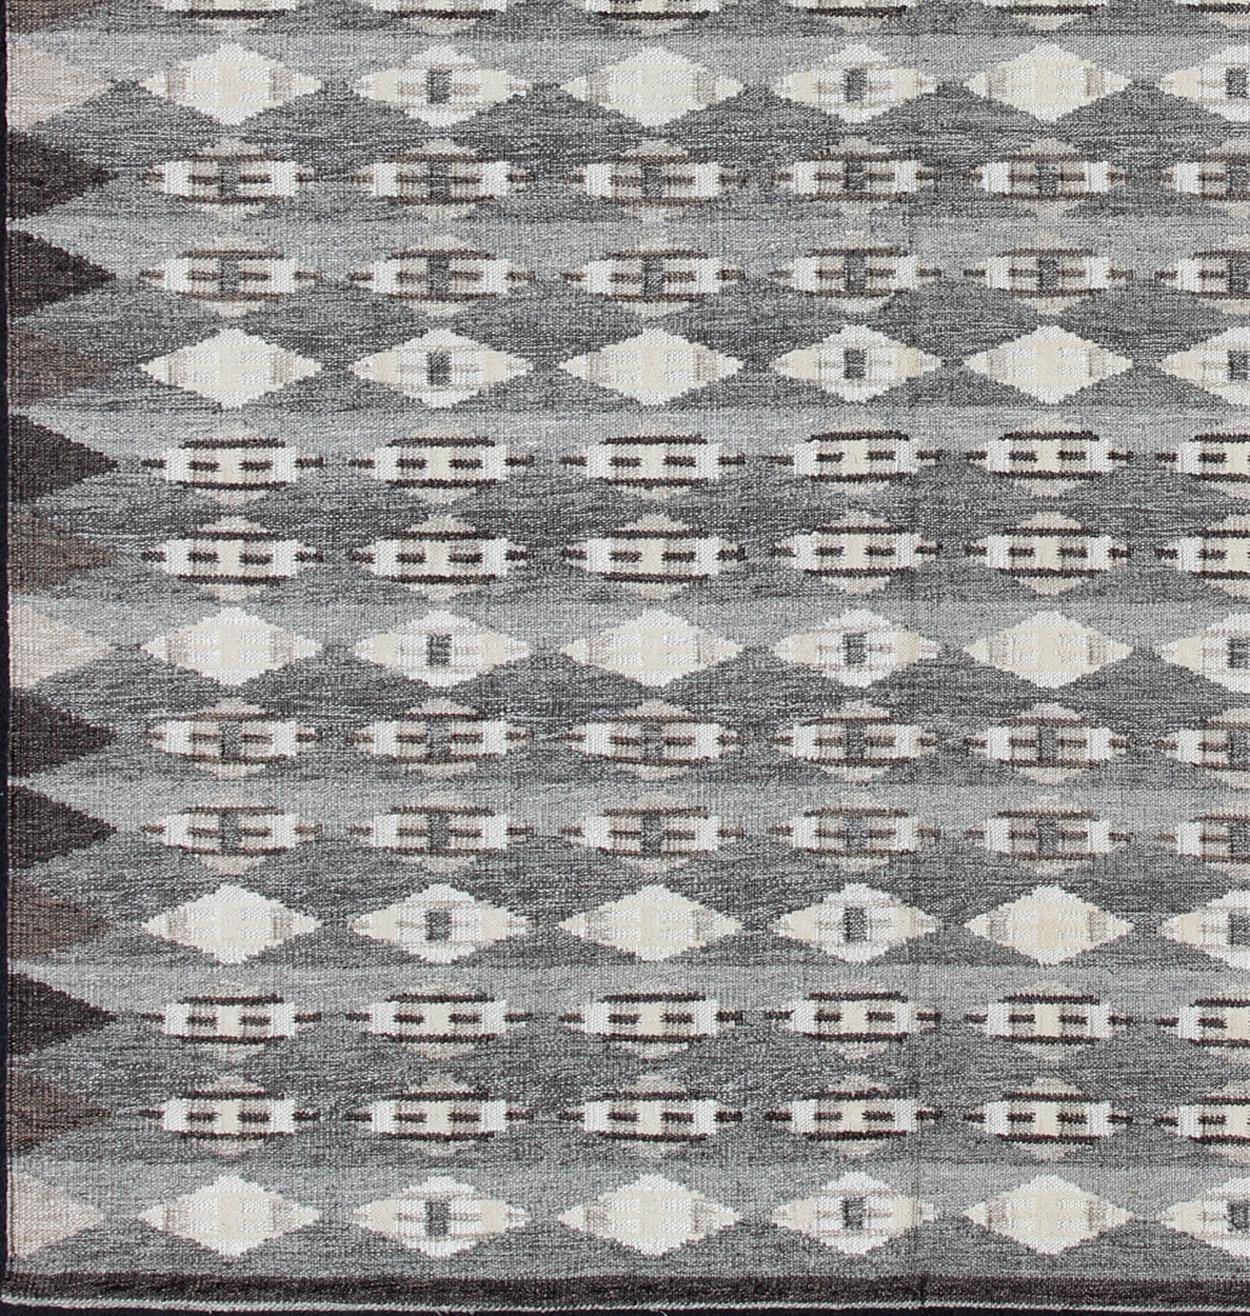 Large Modern Scandinavian flat weave with Geometric Design Rug in Gray & Brown.  Rug/KHN-502-SW-09, This Scandinavian flat-weave rug is inspired by the work of Swedish textile designers of the early to mid-20th century. With a unique blend of